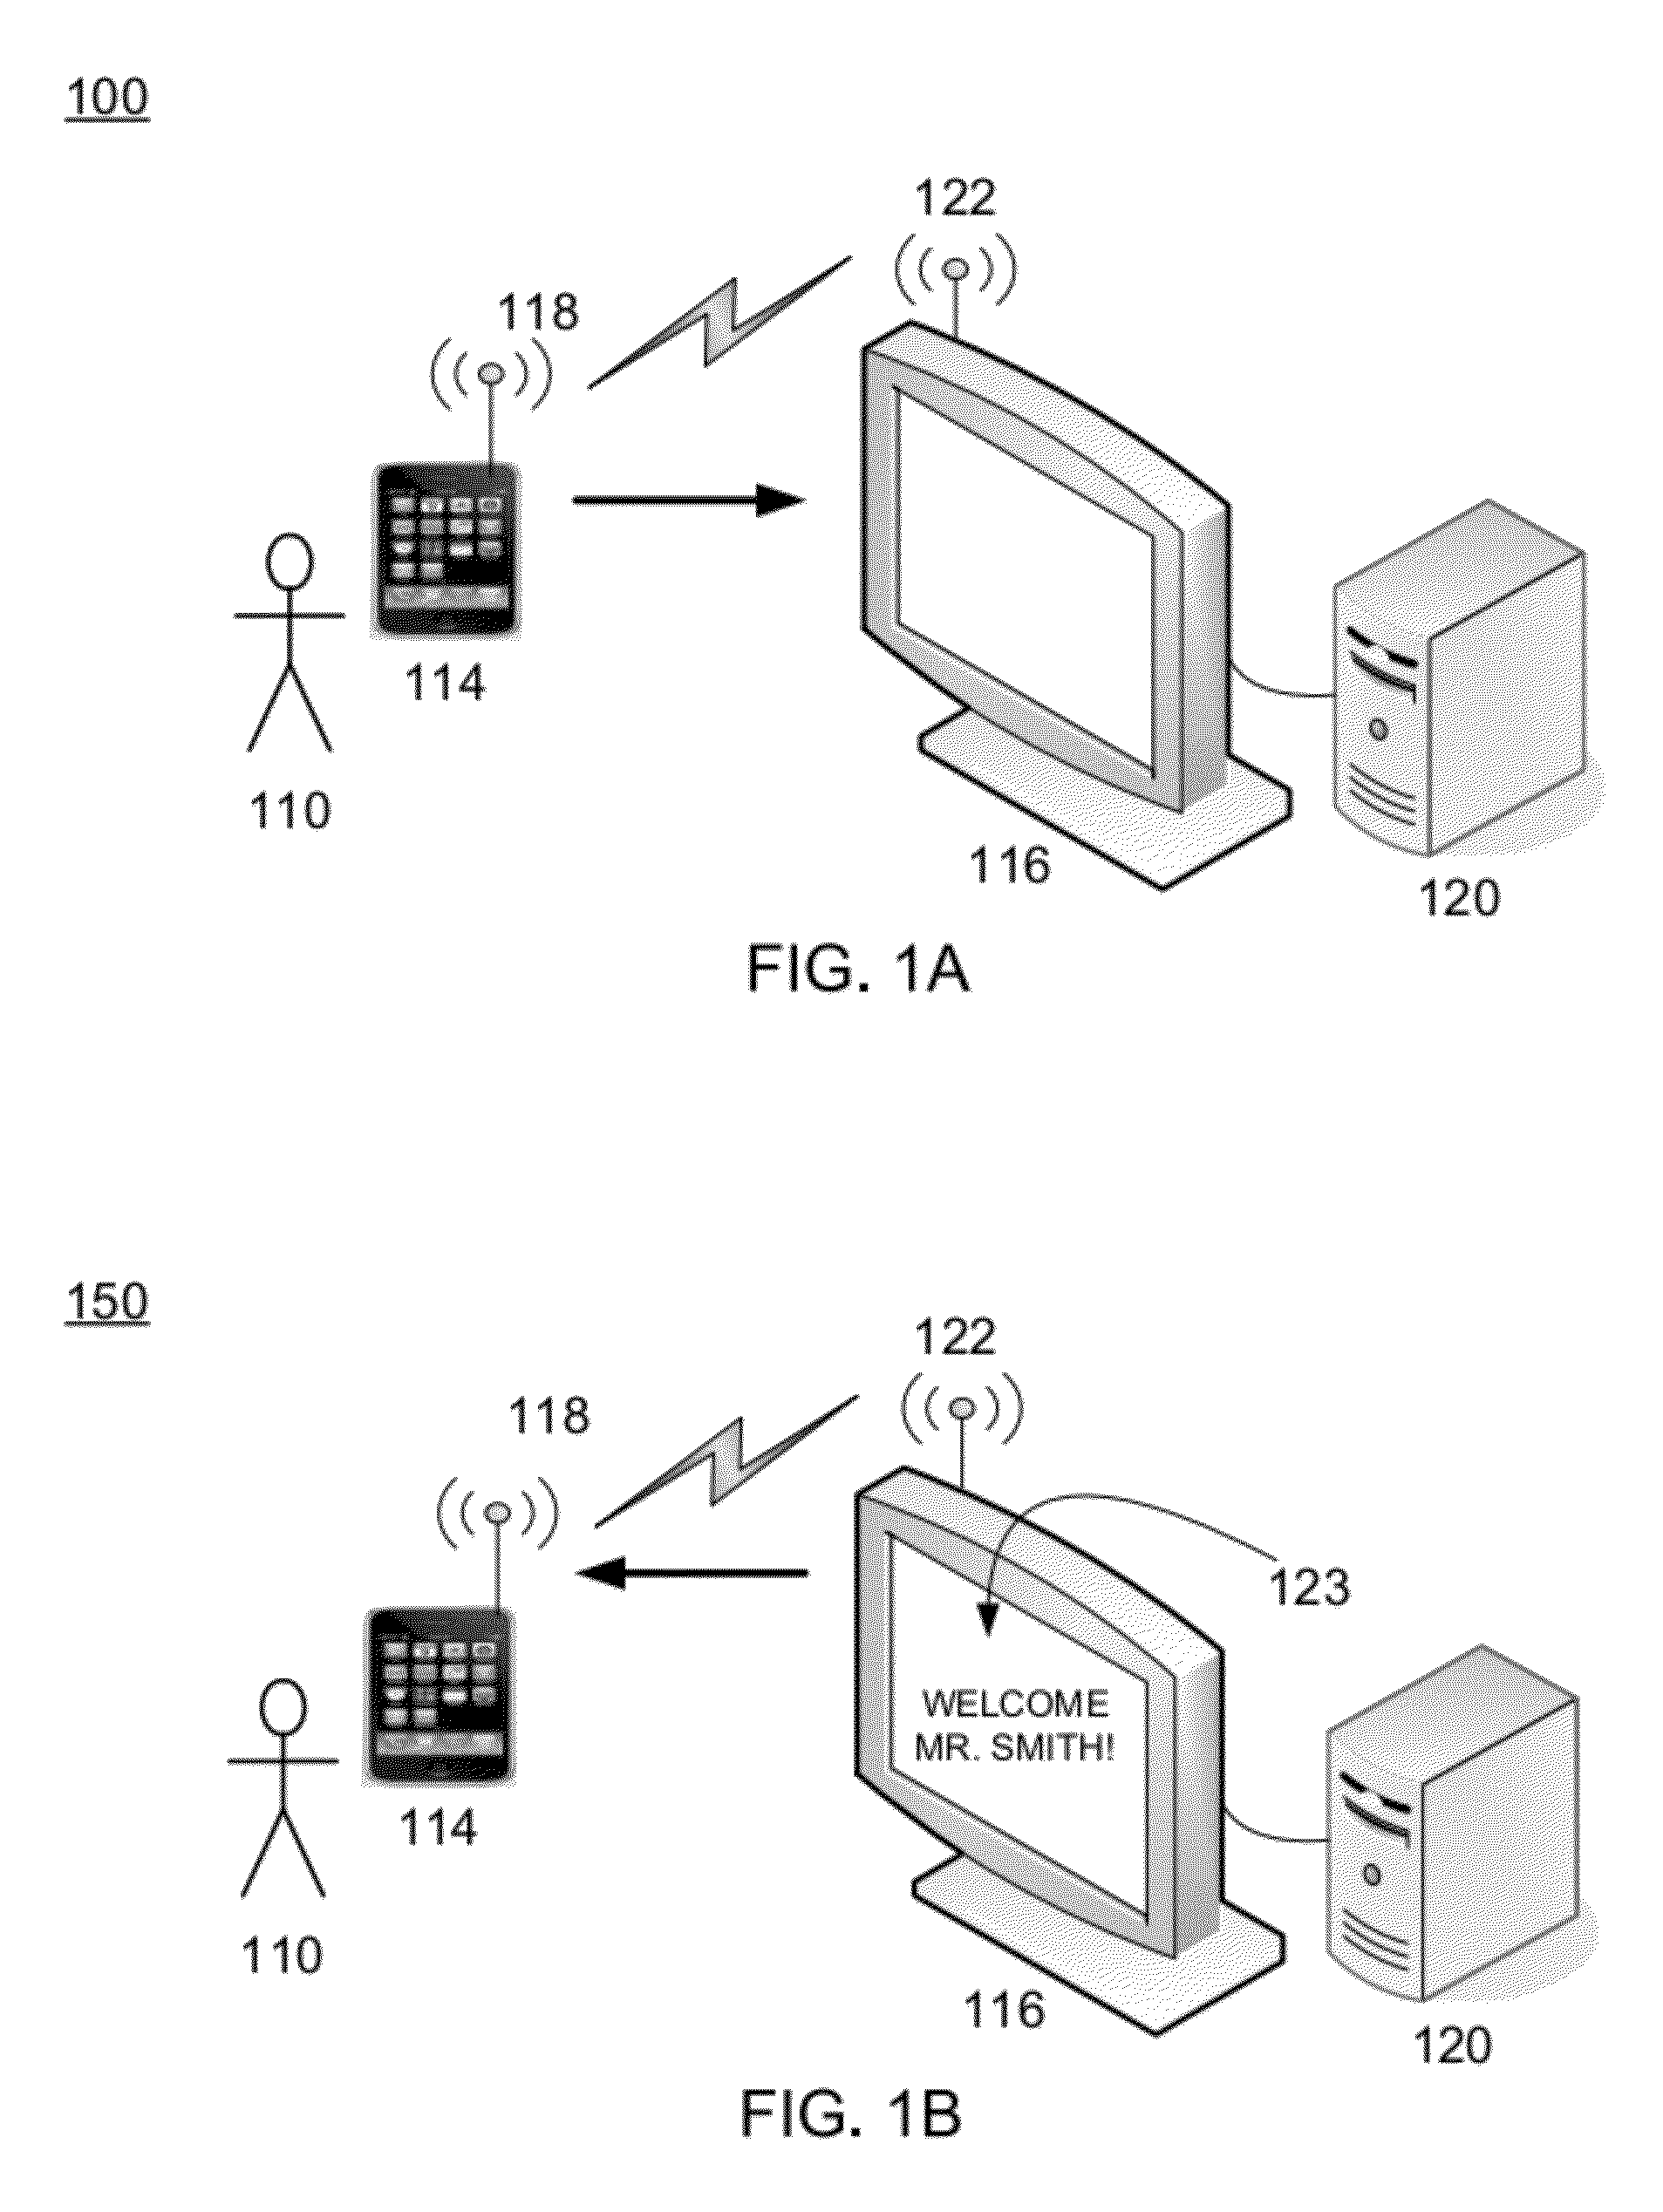 Processing near field communications between active/passive devices and a control system